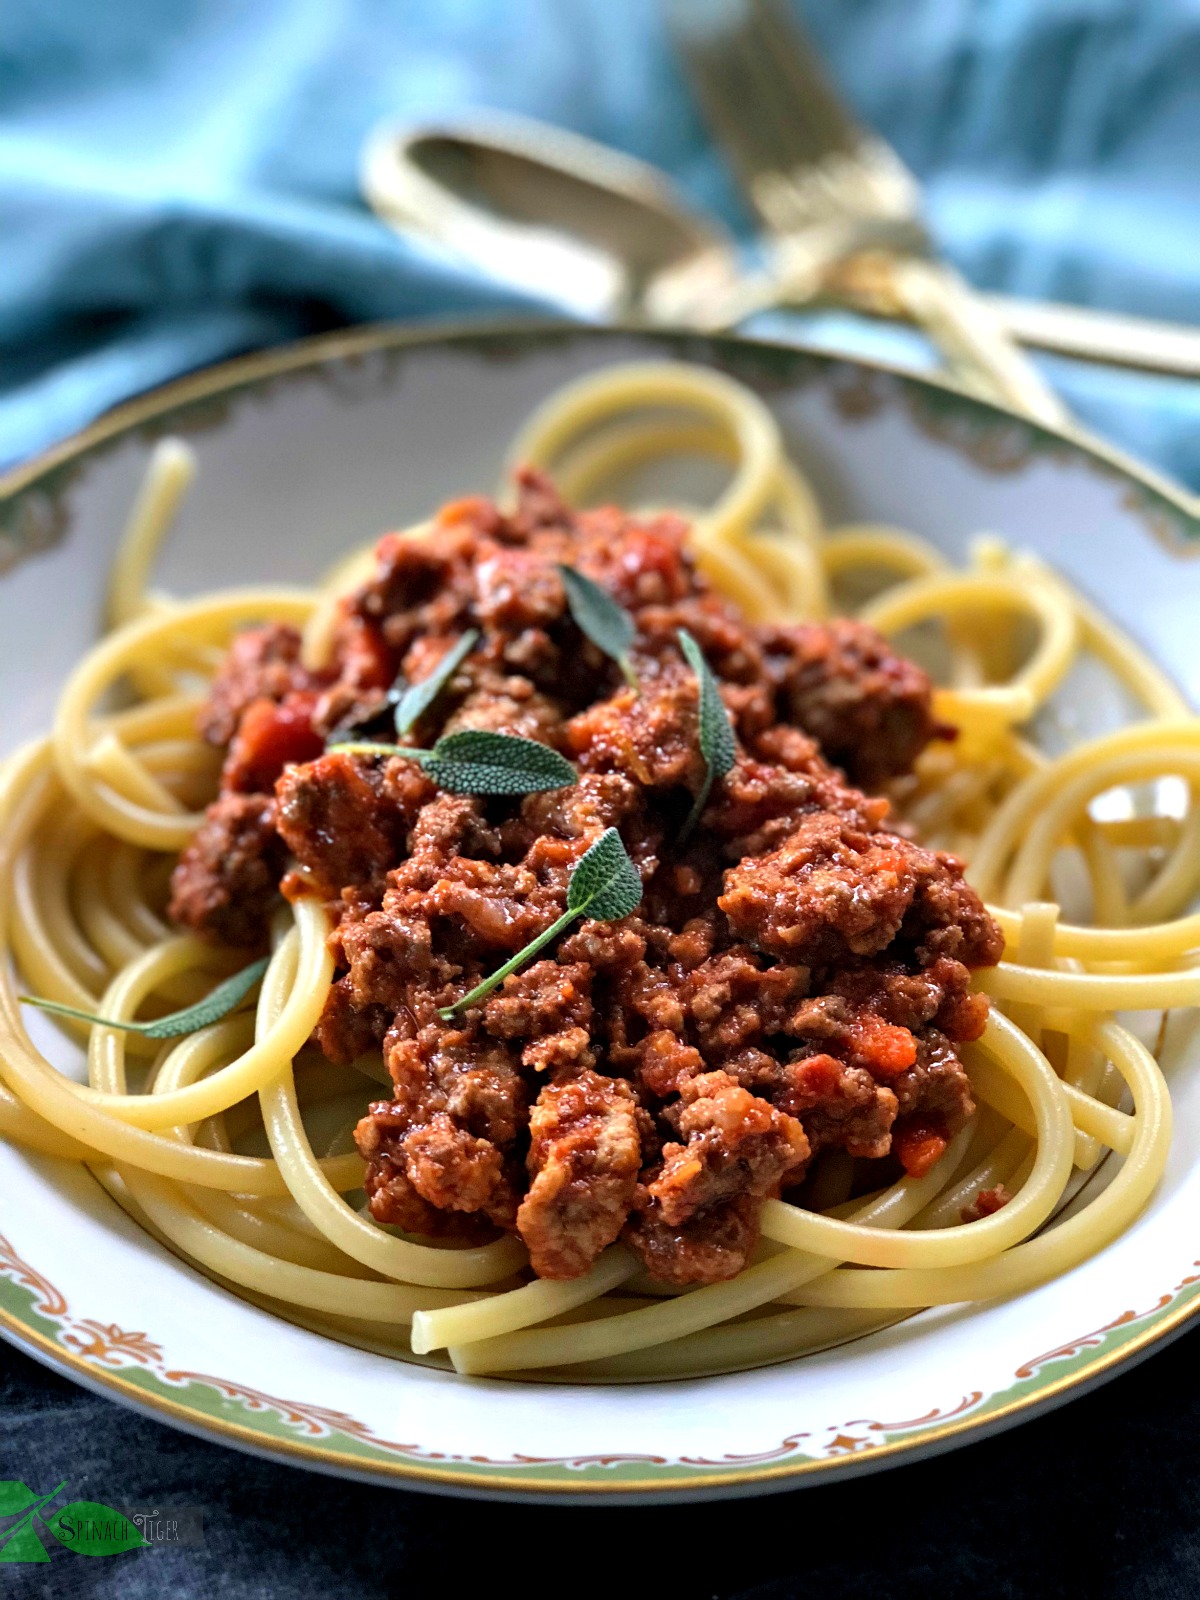 World Aids Day 2018 (Bolognese) from Spinach Tiger